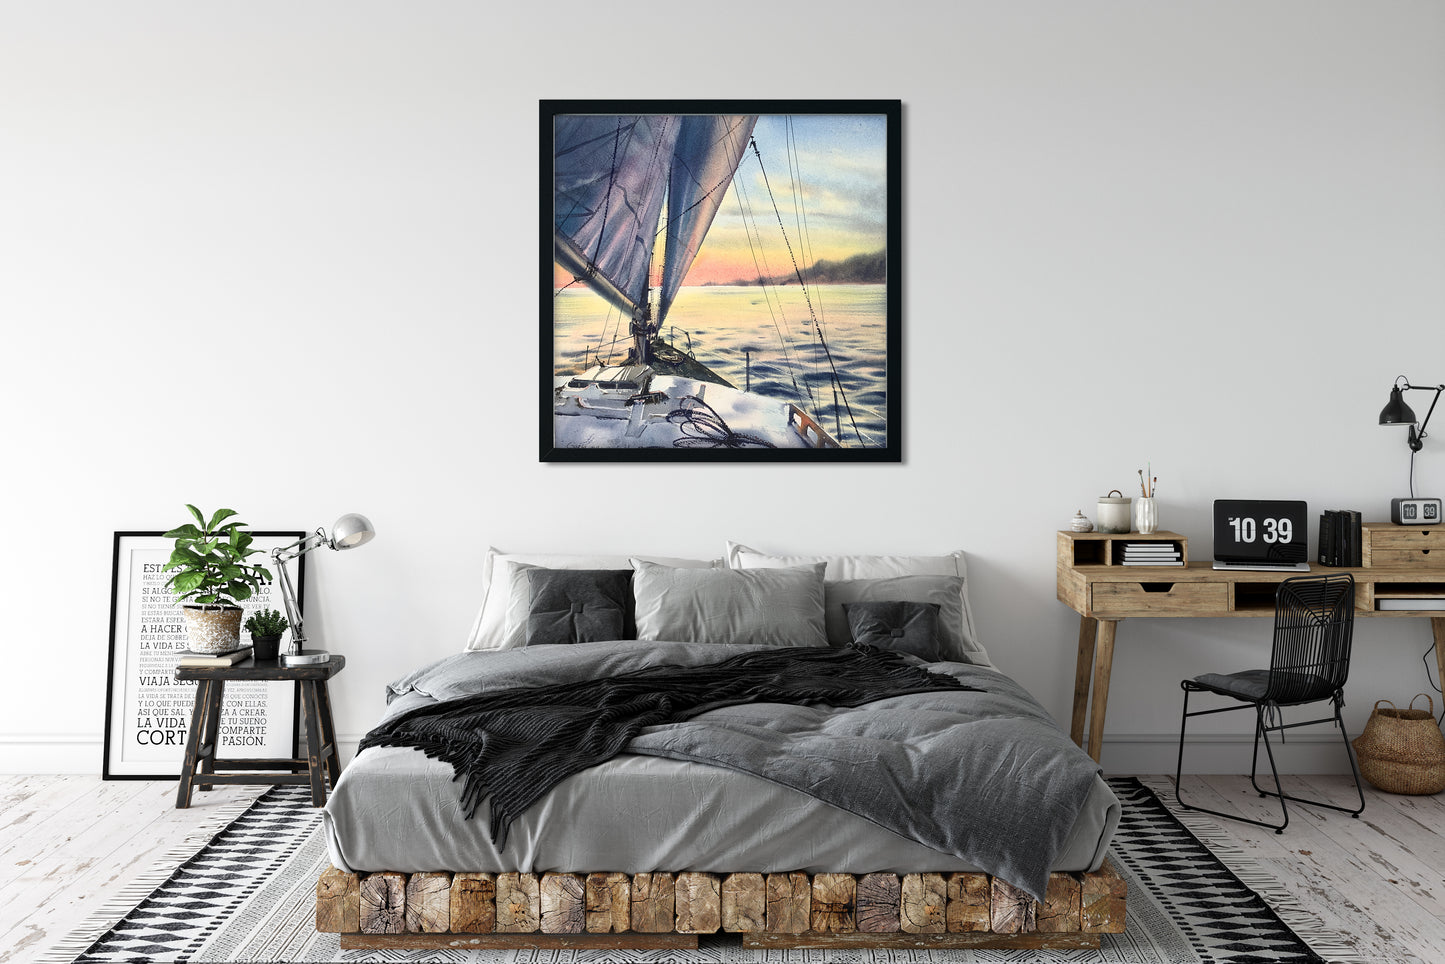 Yacht Wall Art Print, Nautical Wall Decor, Watercolor Sailboat, Summer Seascape, Square Painting on Canvas Orange Sunset